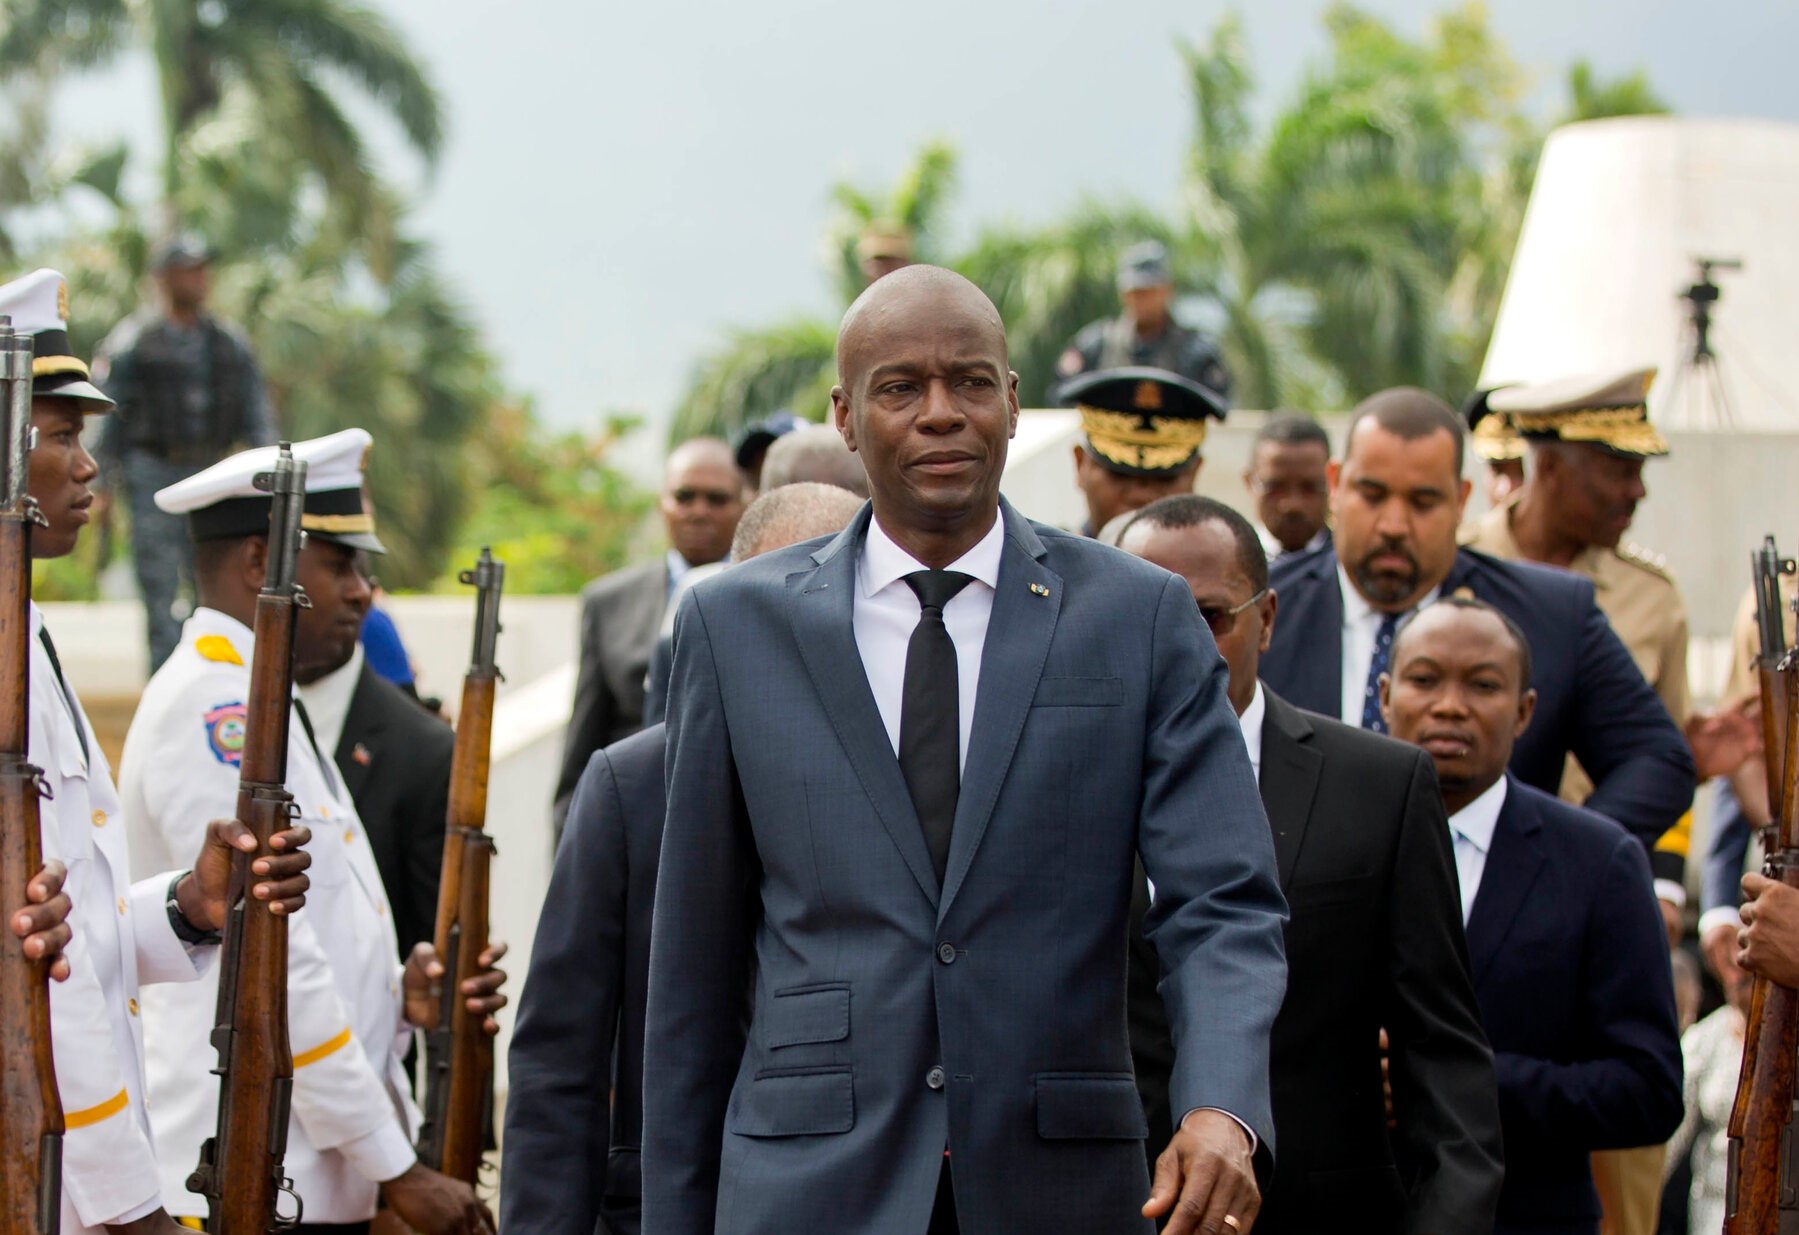 Statement on the Assassination of the Haitian President